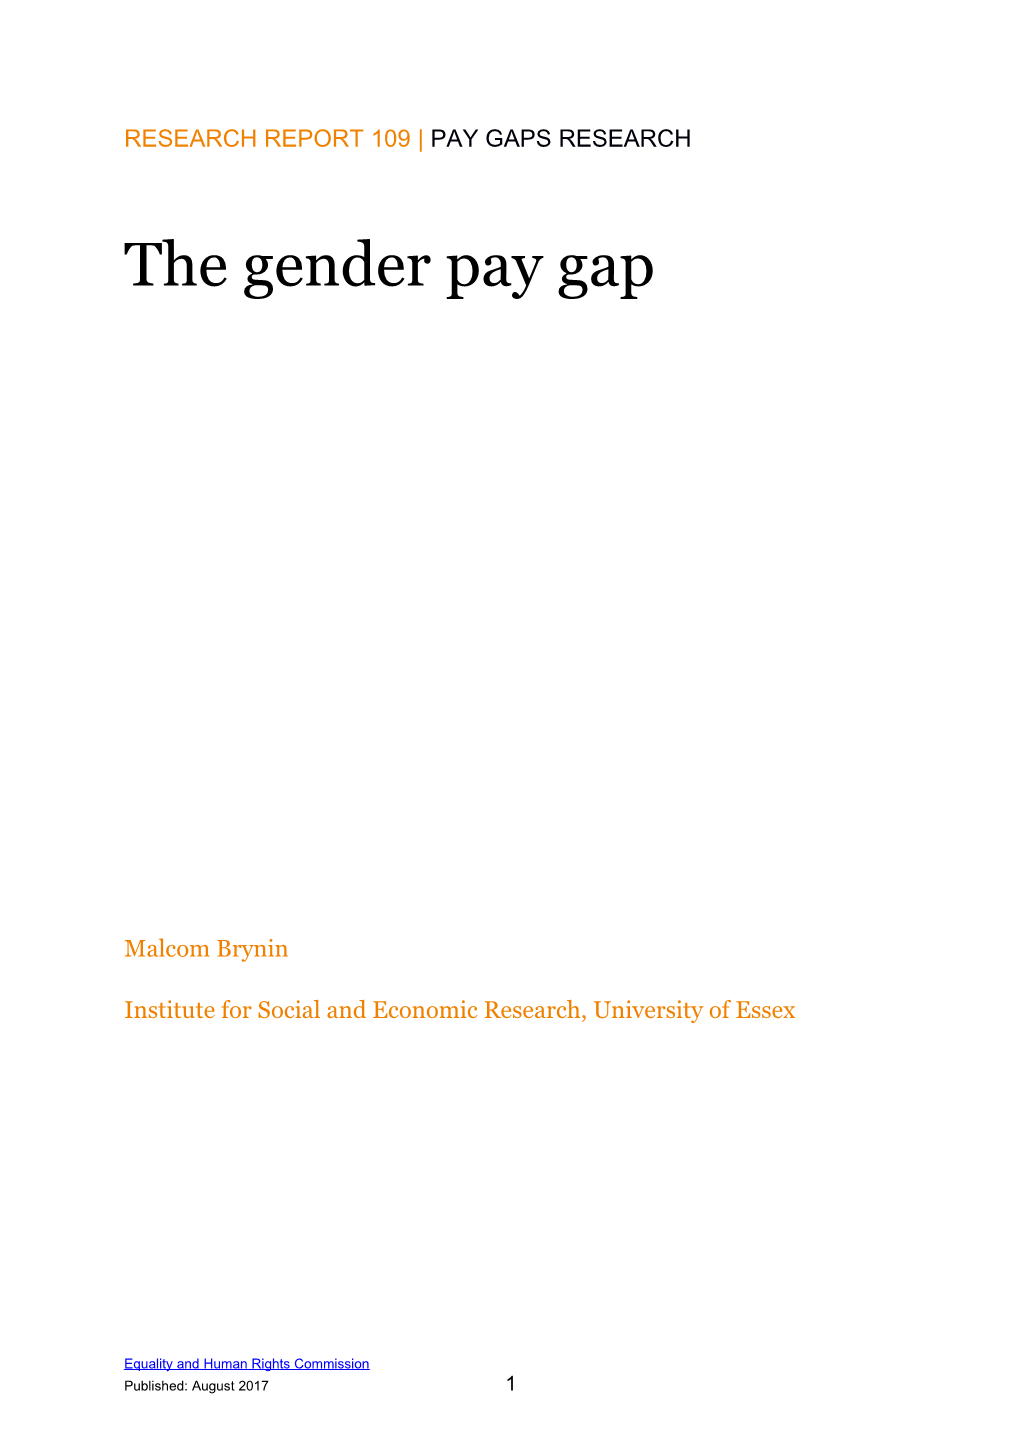 Research Report 109 Pay Gaps Research